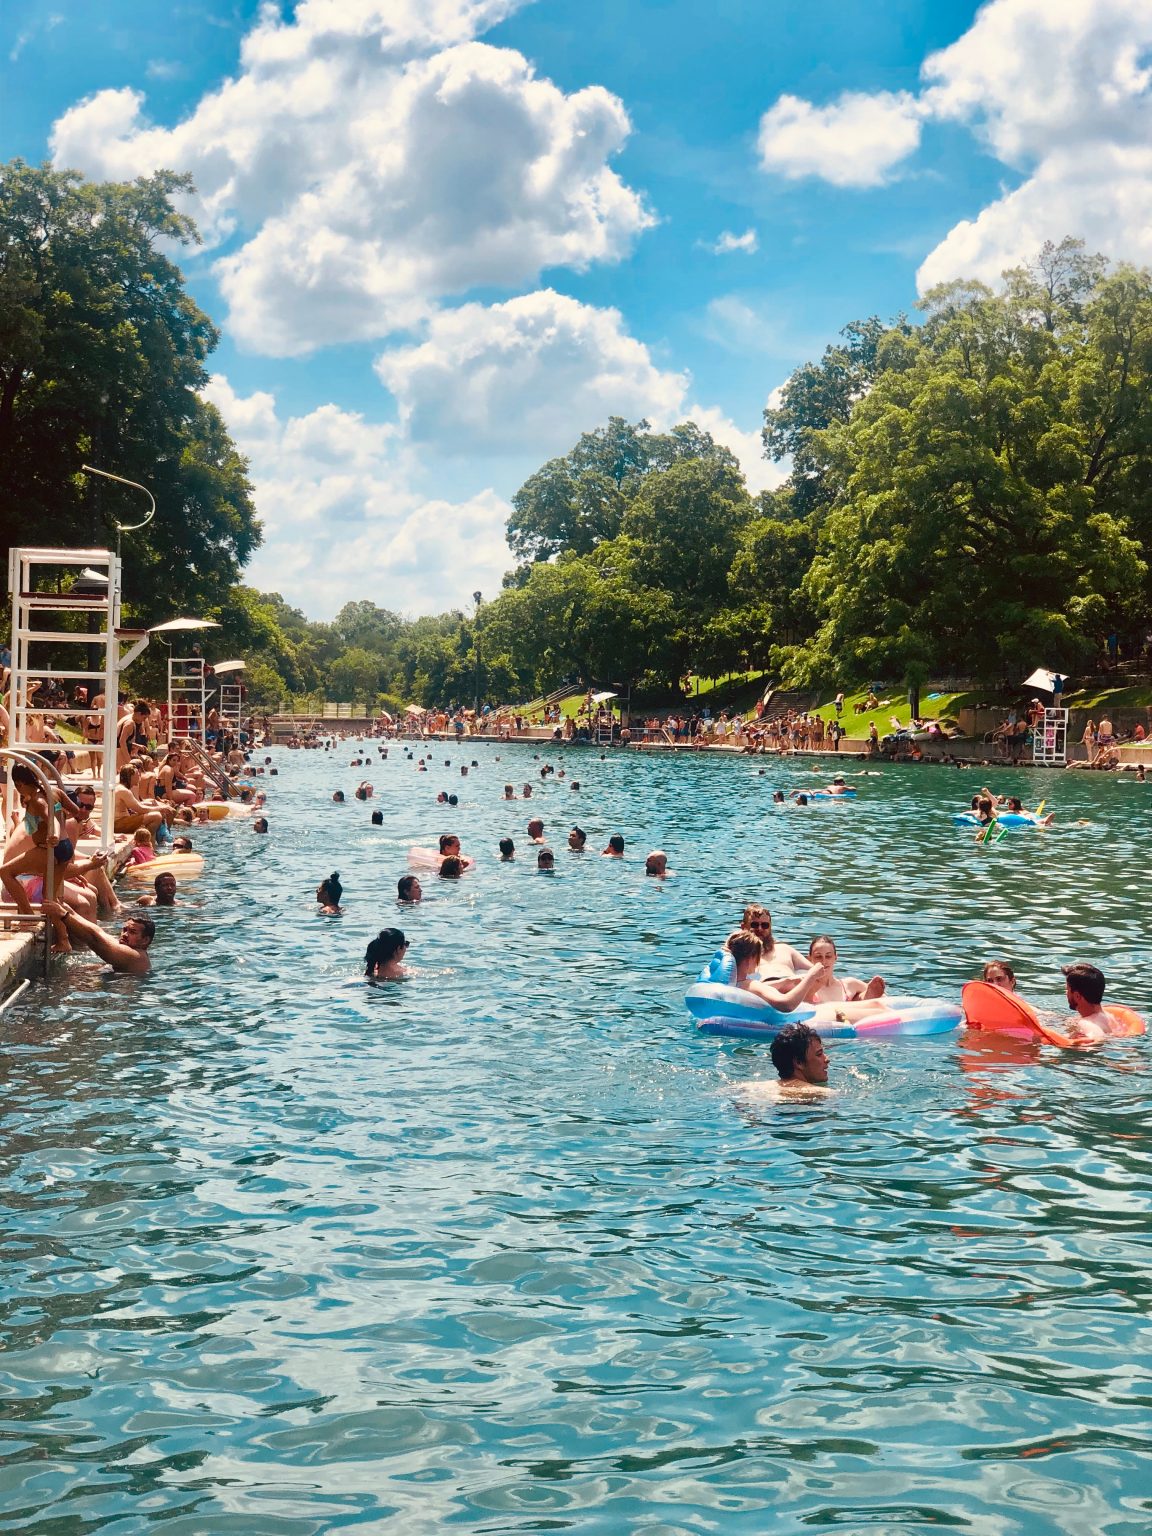 Barton Springs Pool reopens after nearly 3 months